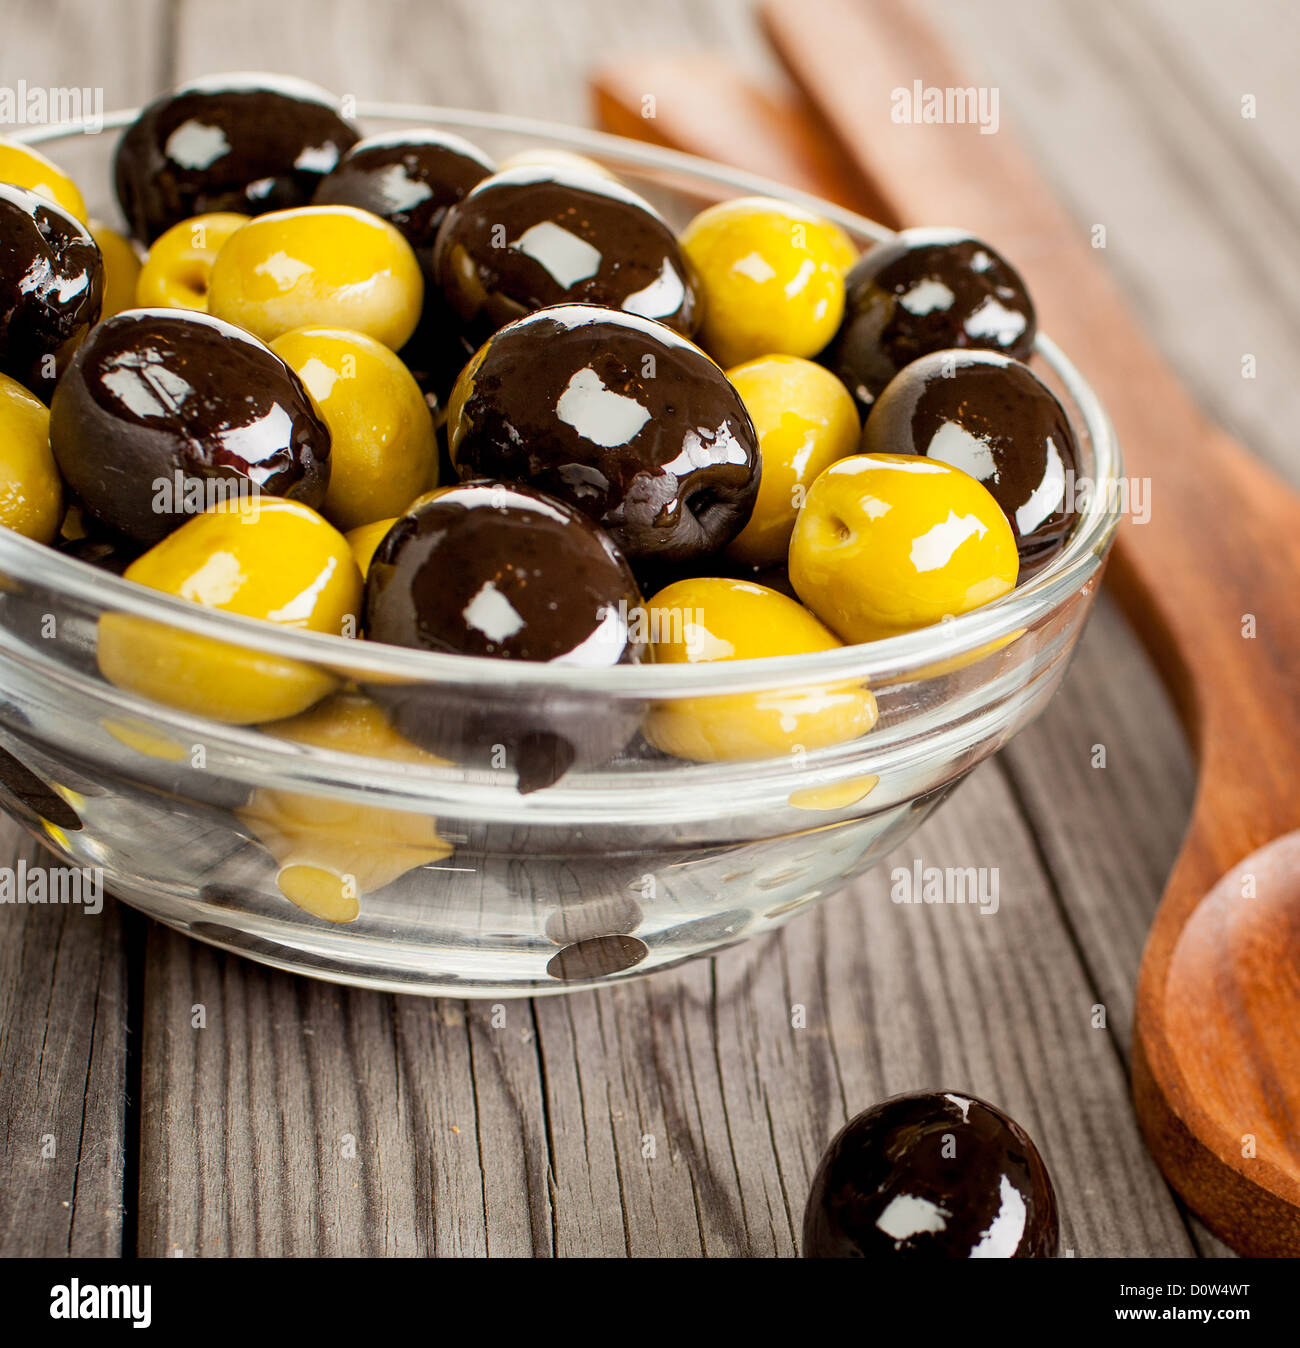 Olives on a wooden table Stock Photo